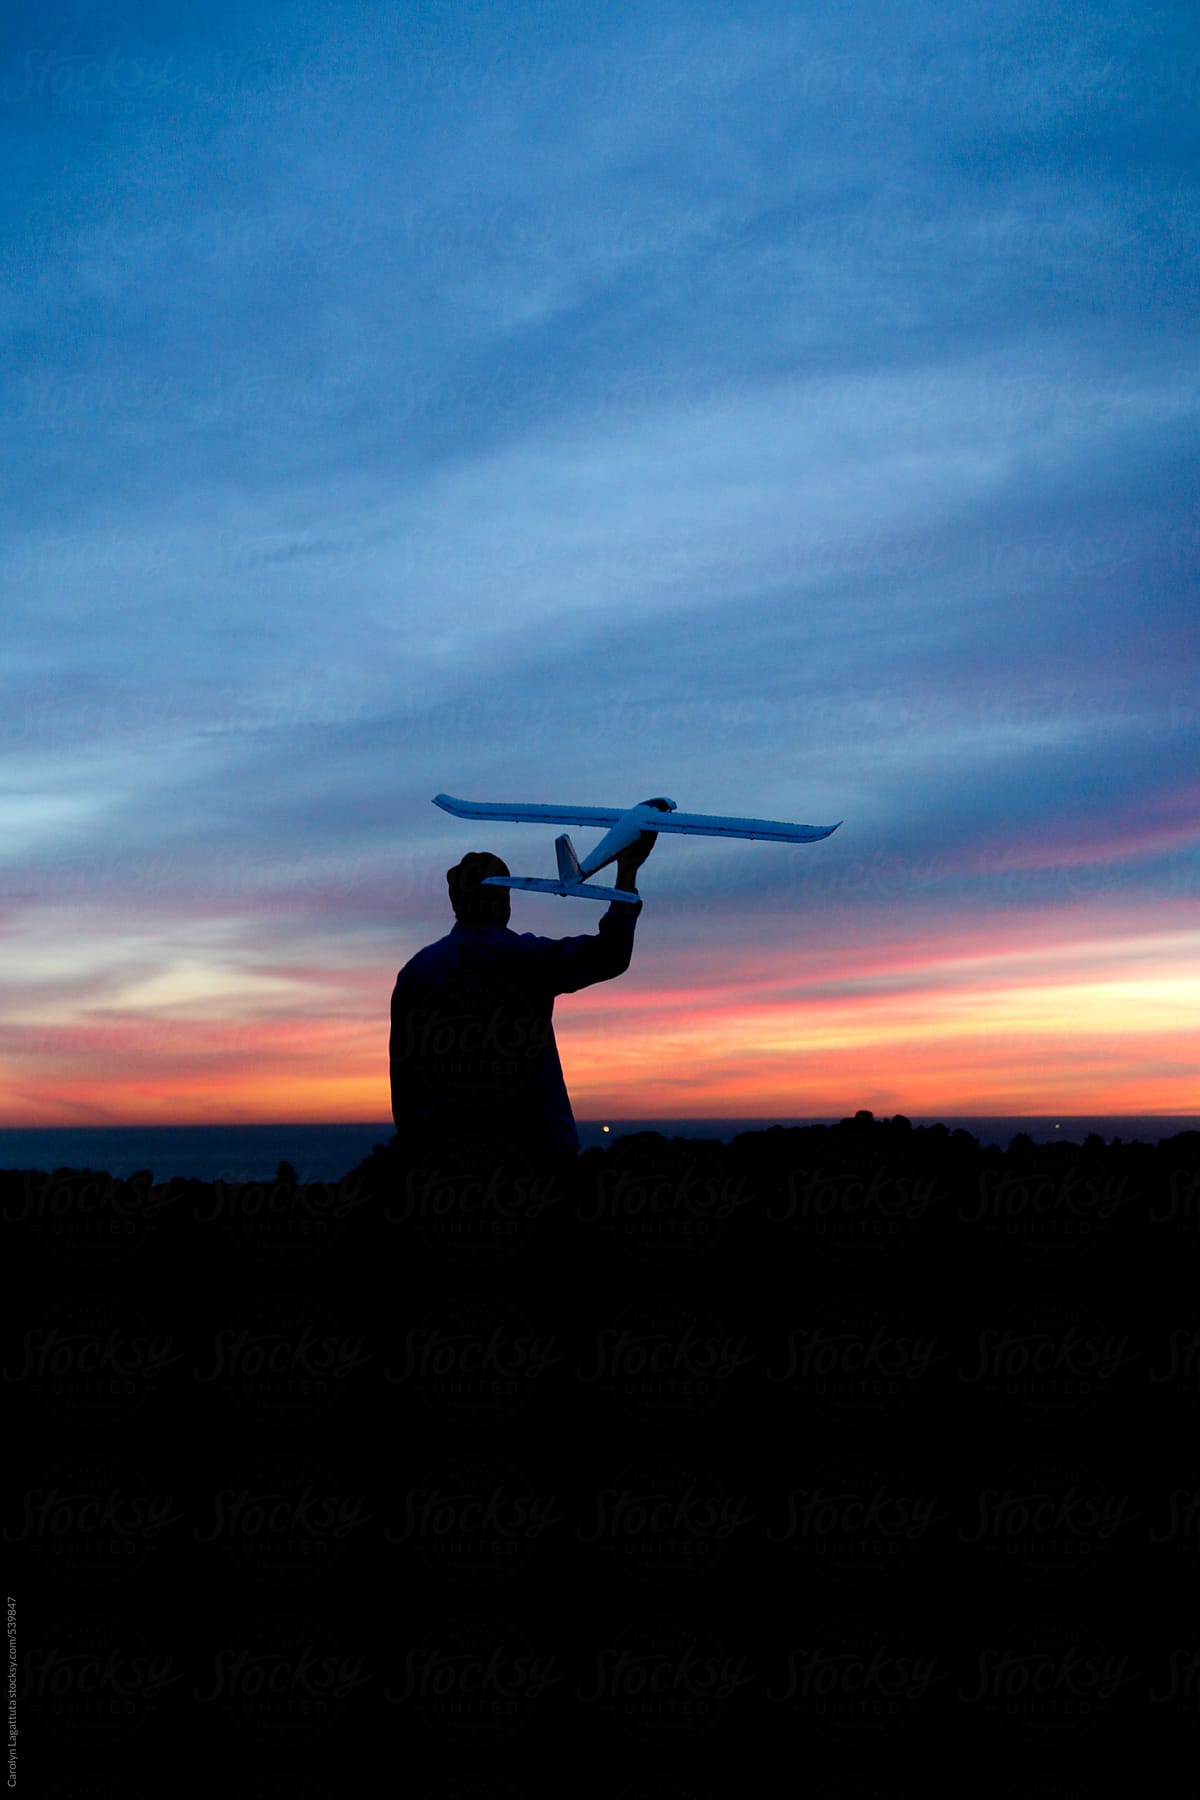 Silhouette of a man holding a large remote control plane at sunset